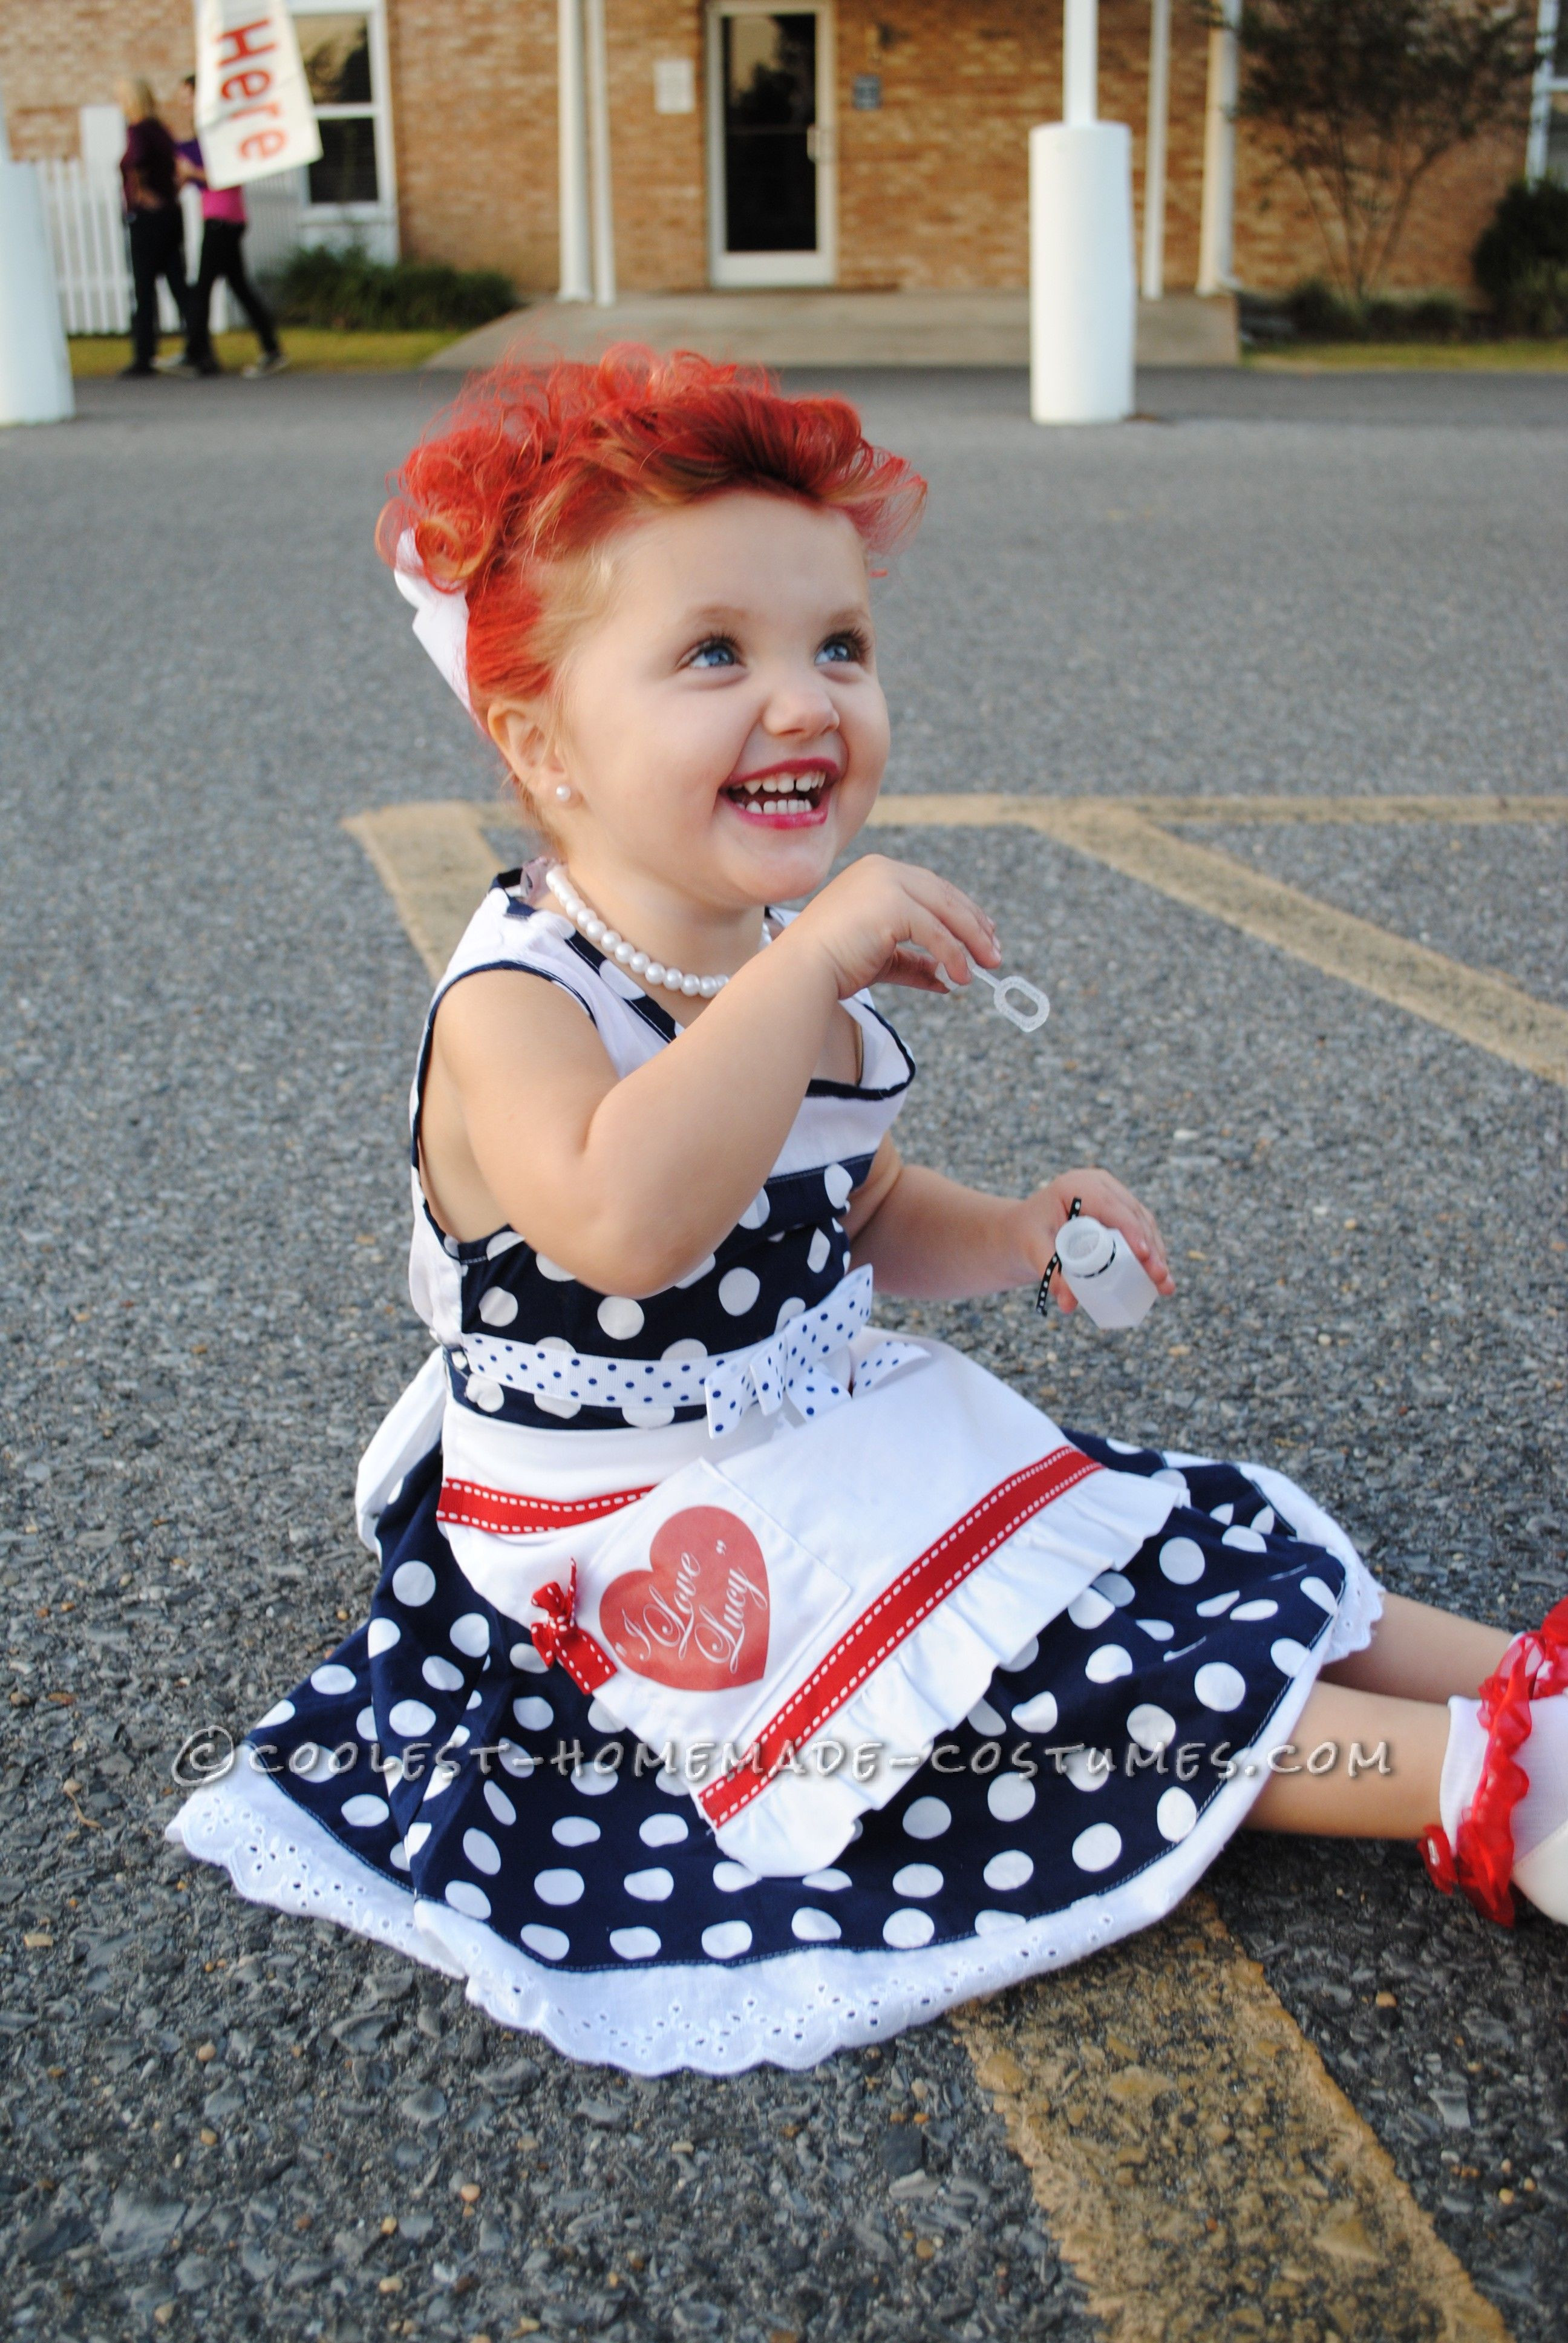 DIY Infant Costume
 Adorable "I Love Lucy" Homemade Costume for a Toddler